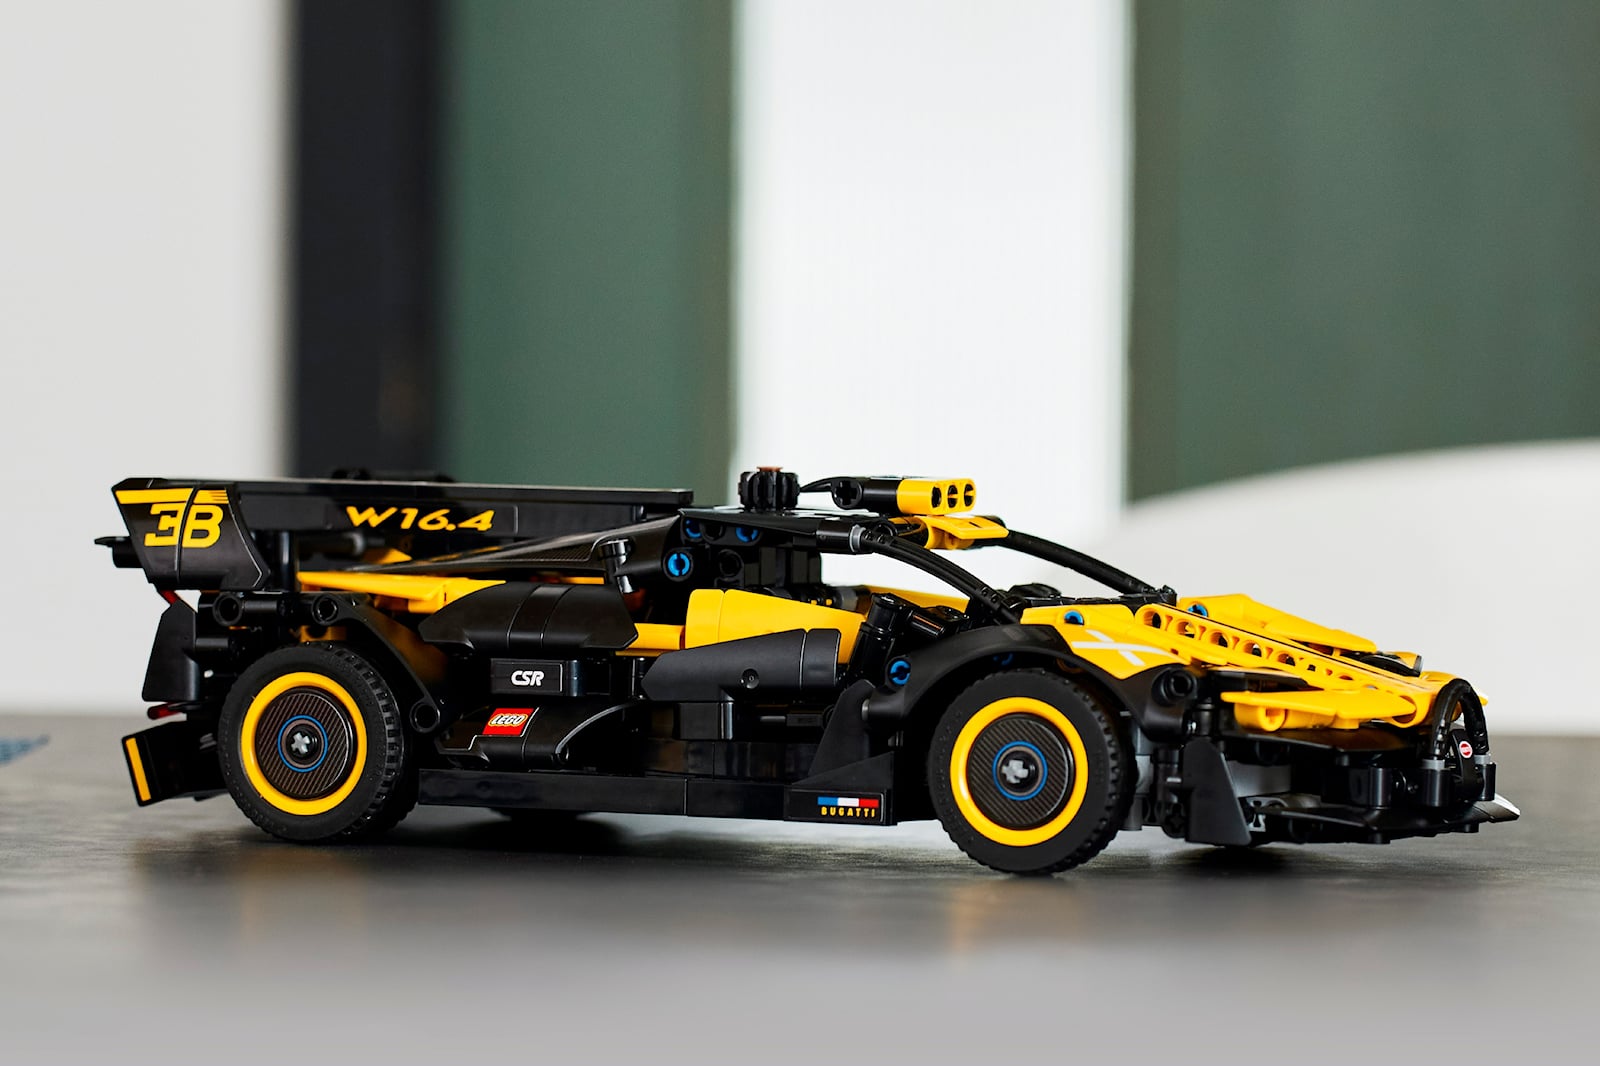 If you can't afford a real Lamborghini, this Lego Technic set is